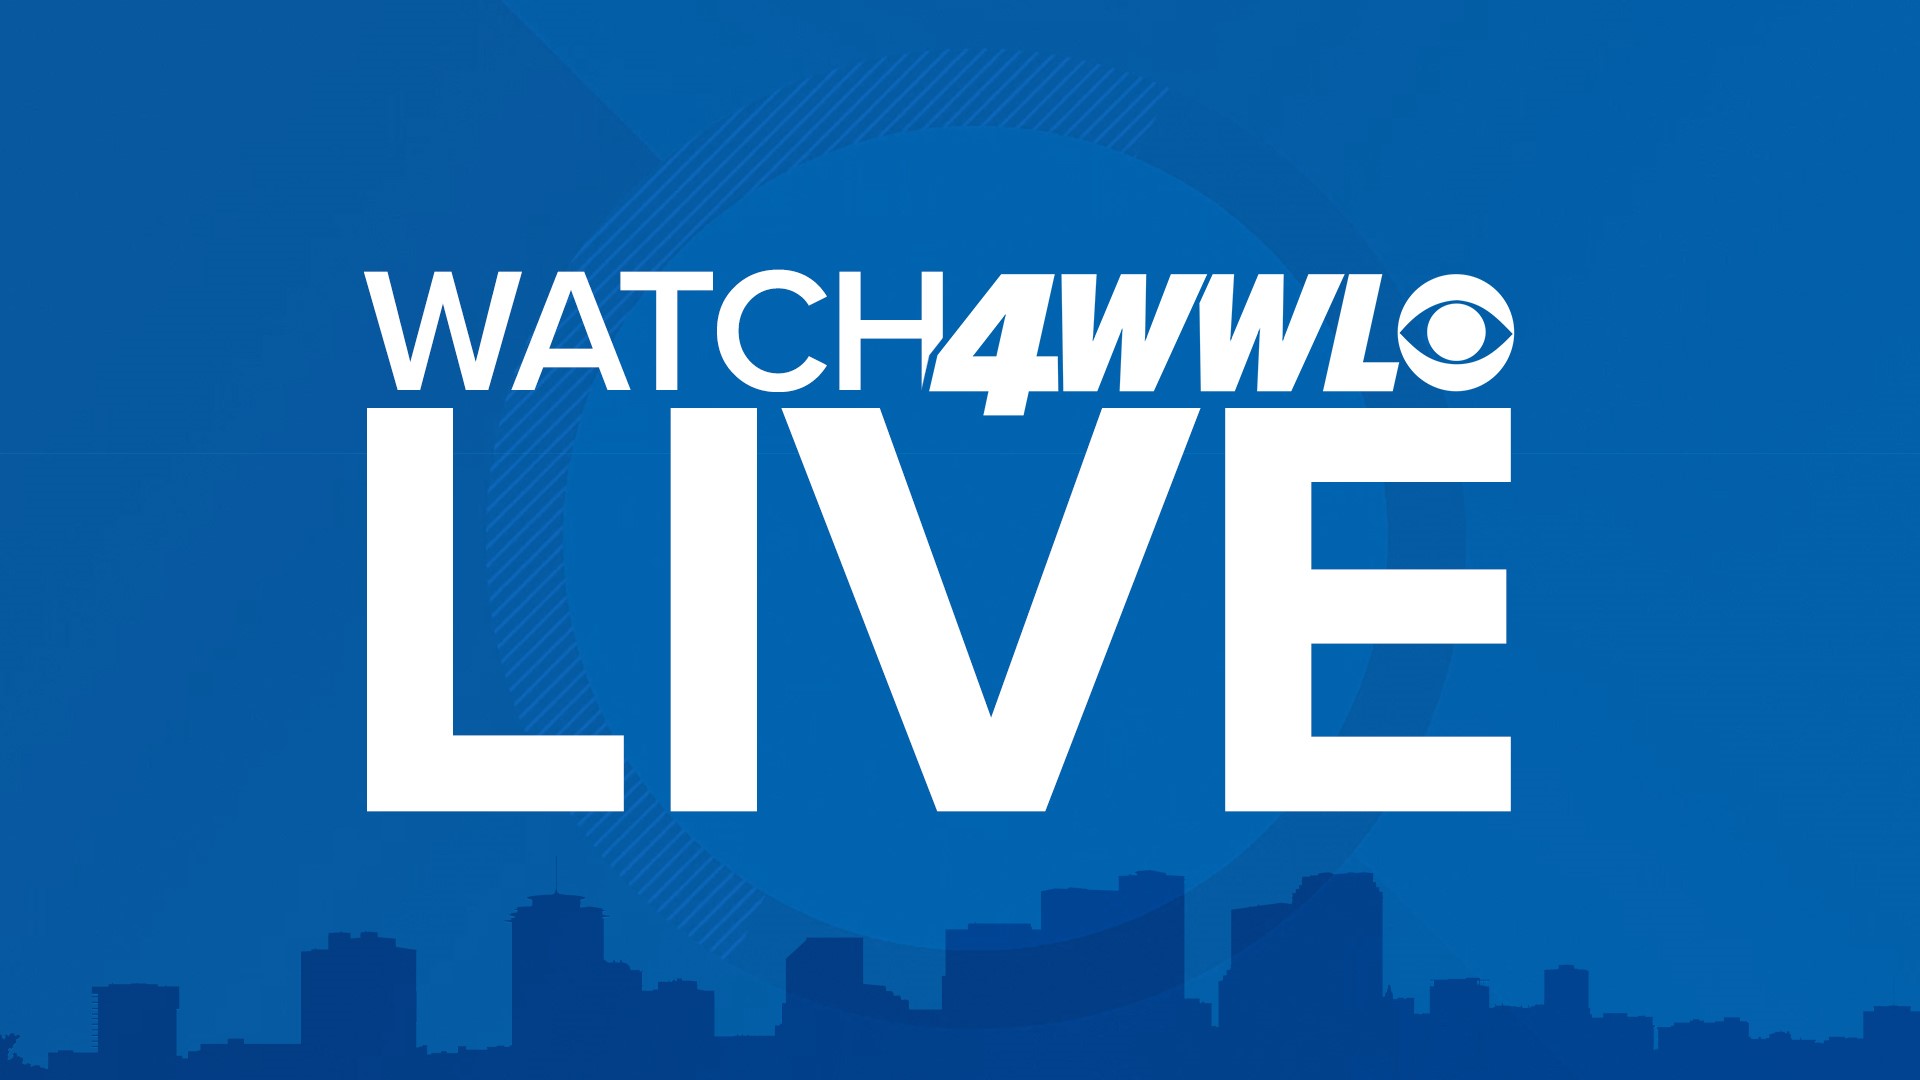 WWL-TV live newscast player. If the feed is not  showing, it's because we are waiting for the press conferences to start. Try back in a few minutes.